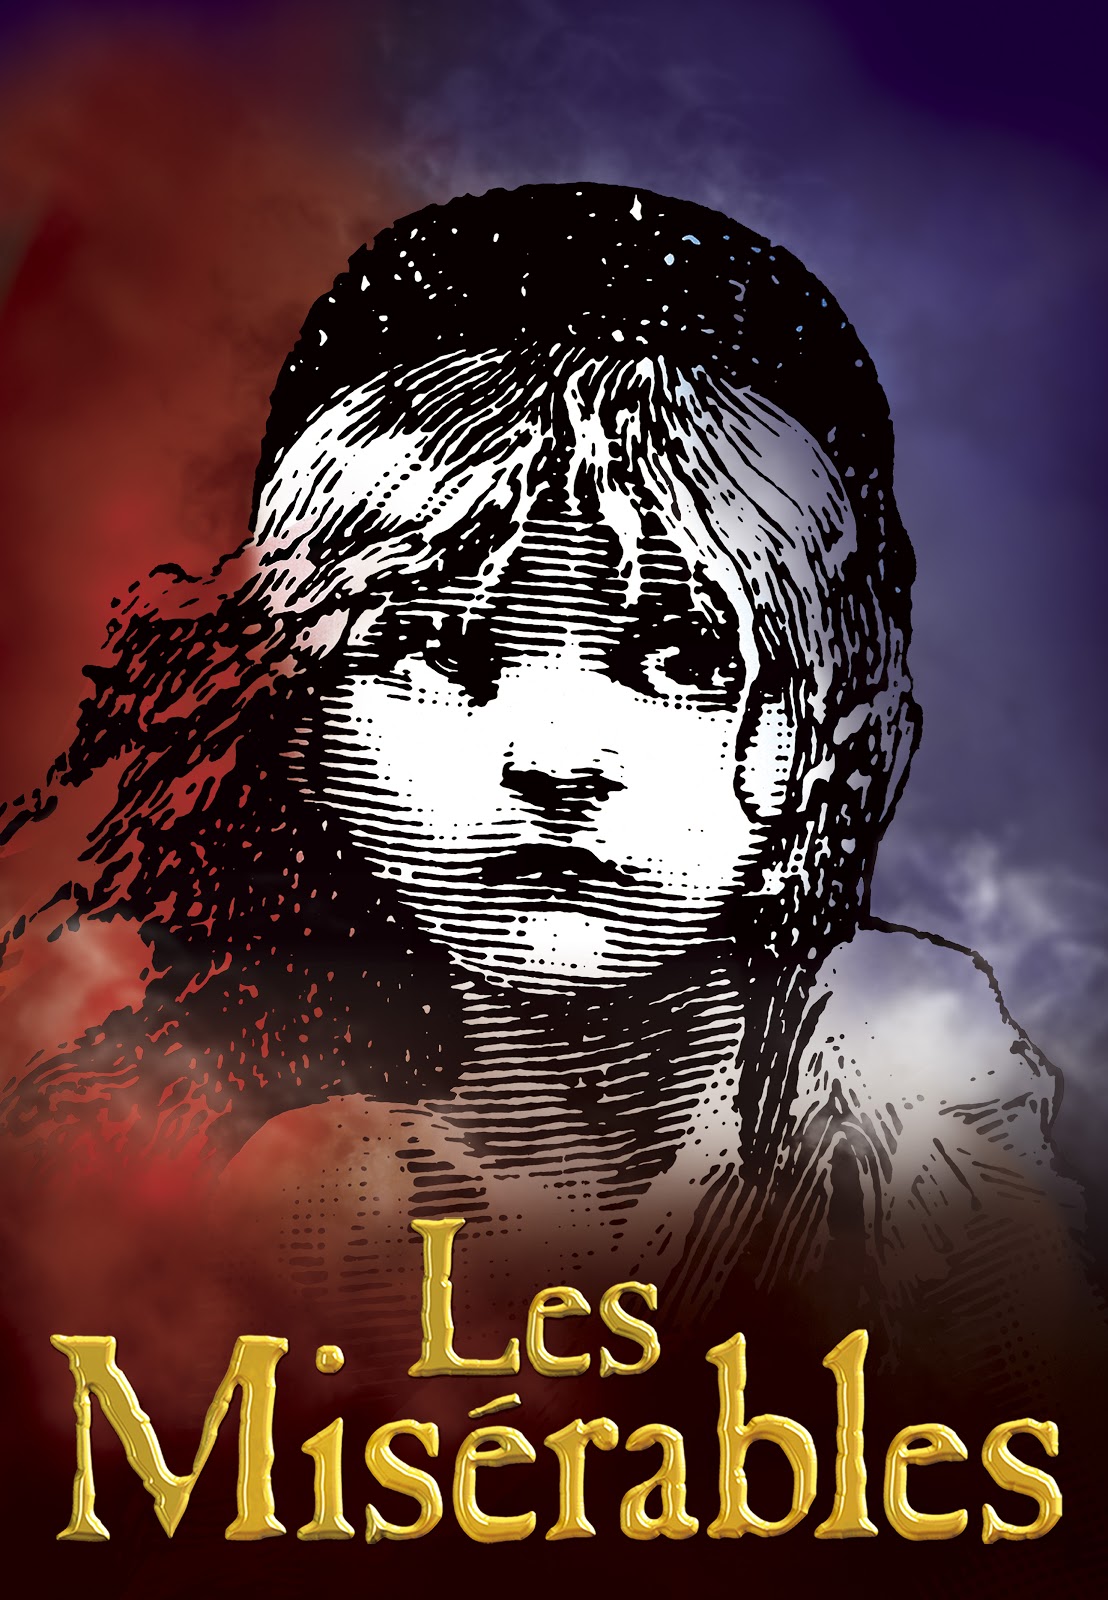 Pagosa Springs Center for the Arts is offering Les Misérables (July 5 – August 9, 2014) directed by Tim Moore with music direction by Venita Burch.